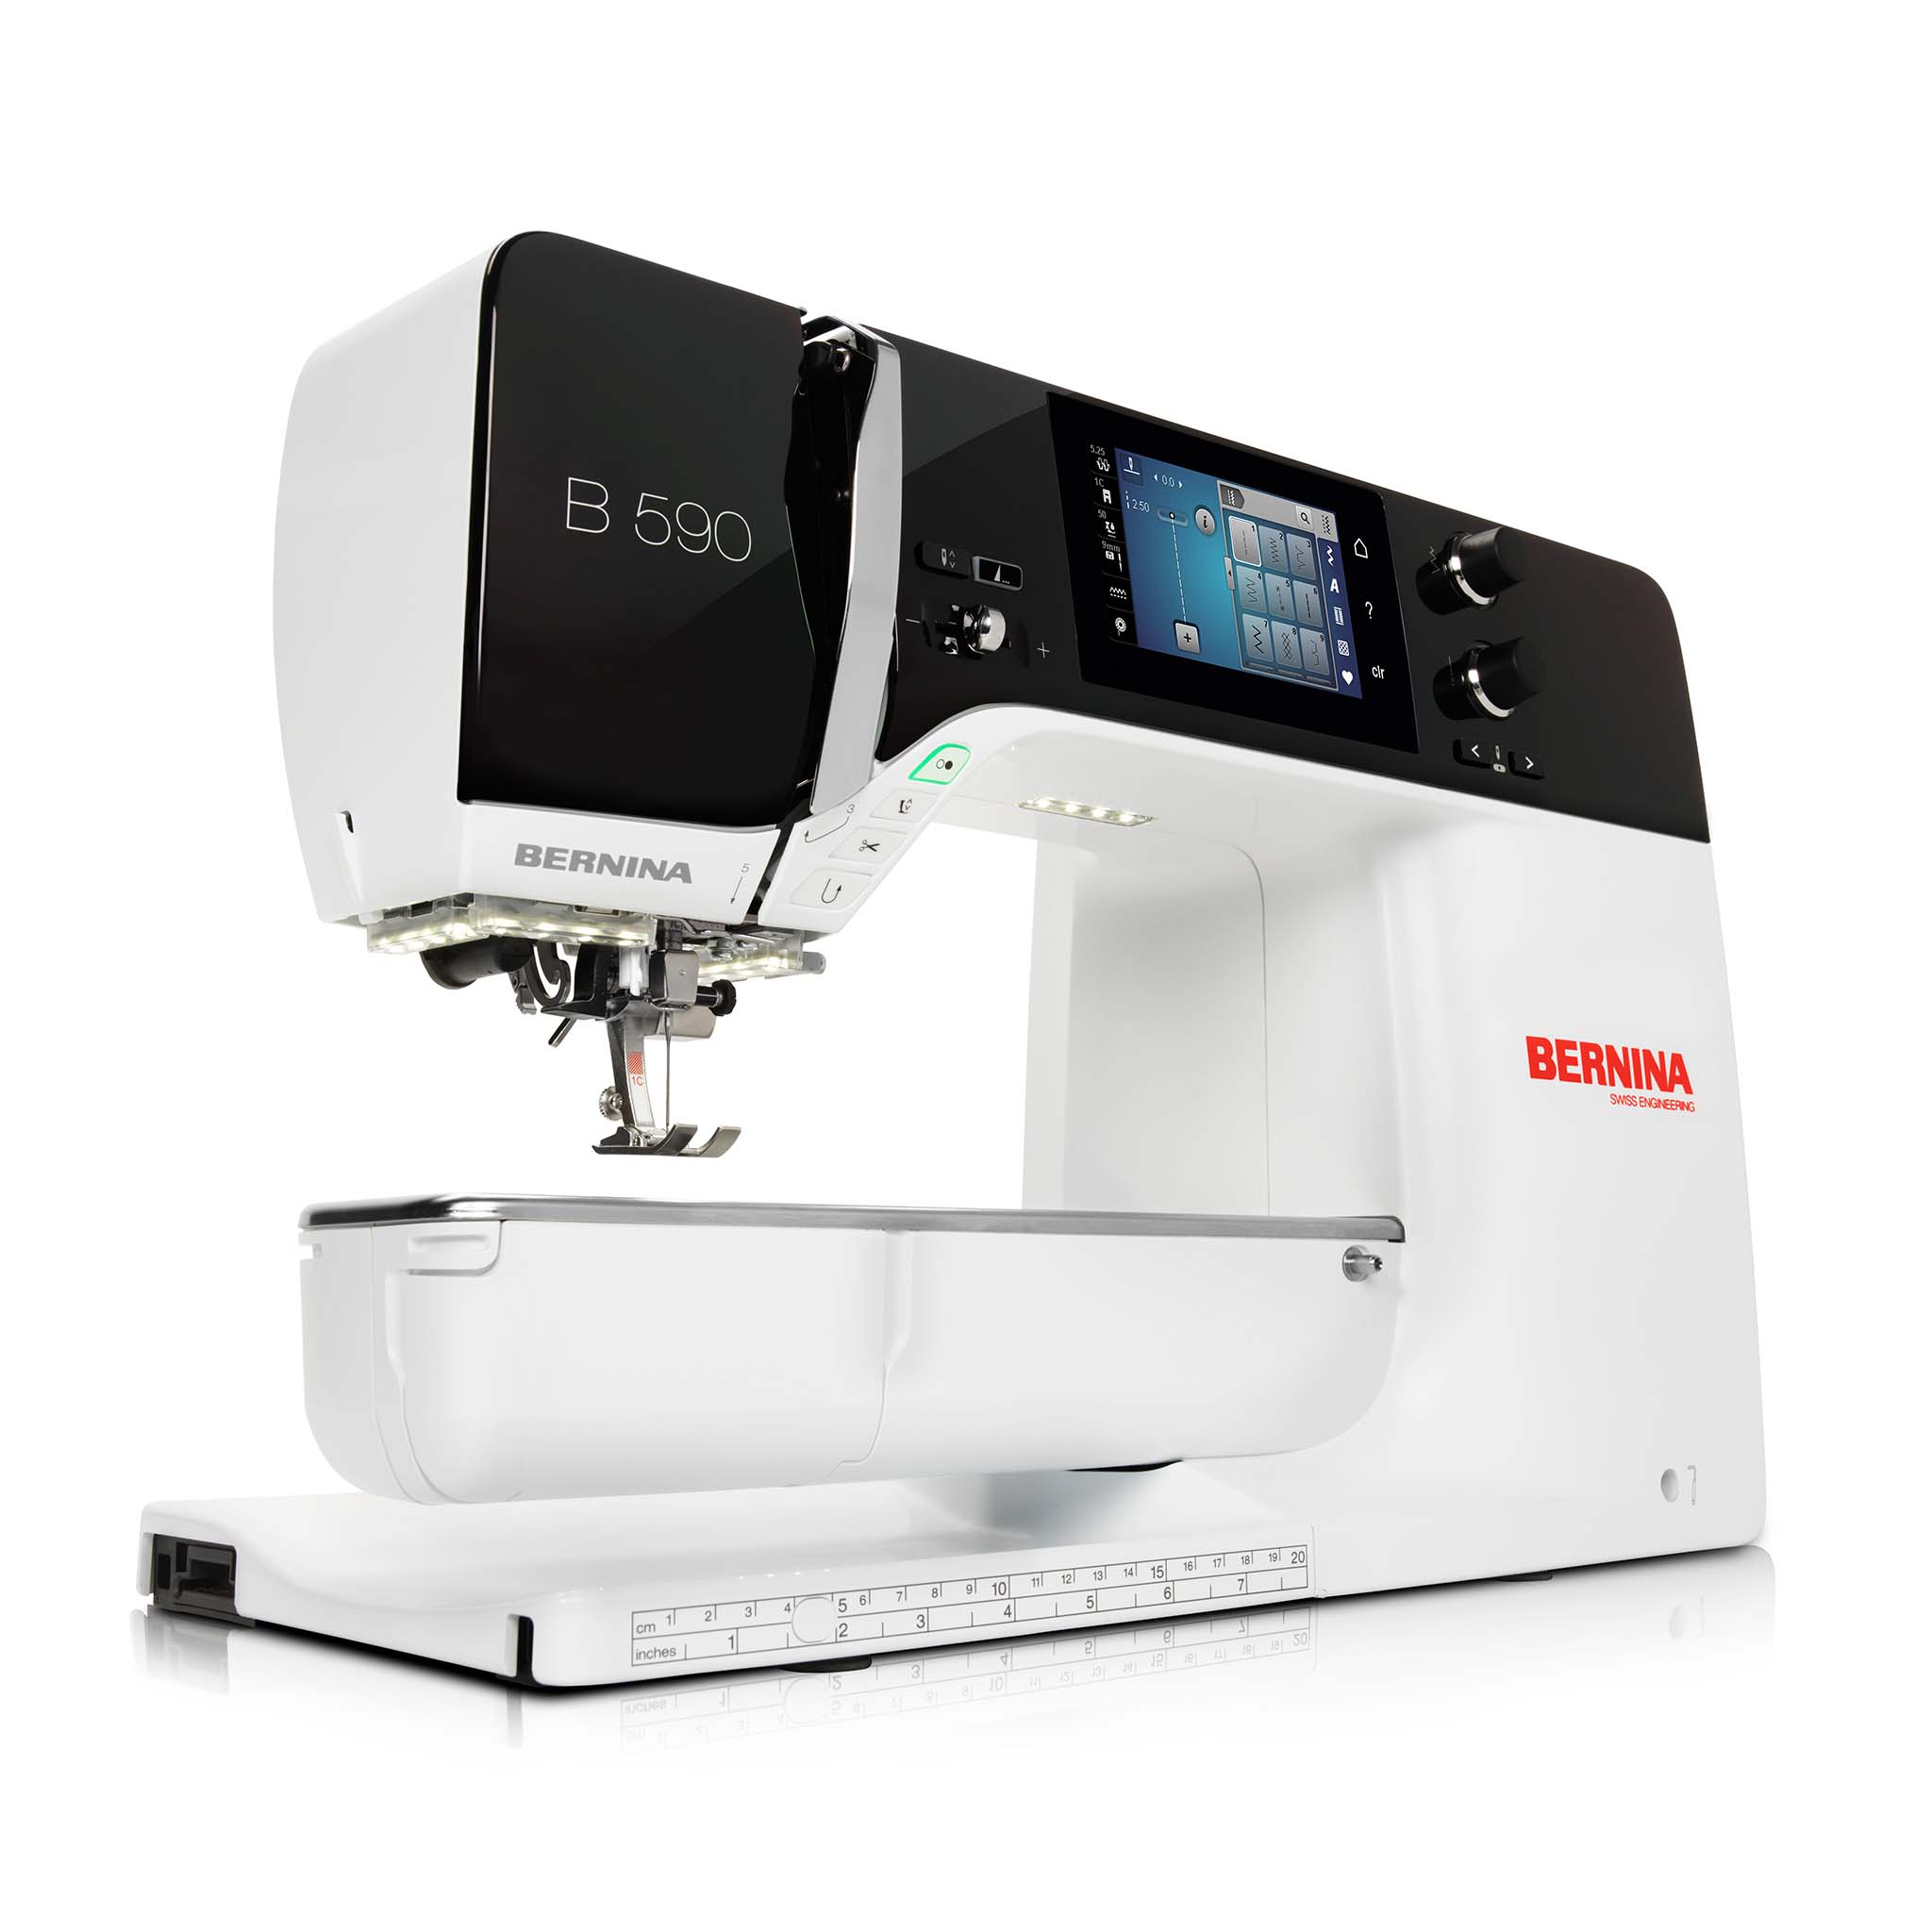 BERNINA 590 Sewing, Quilting & Embroidery Machine